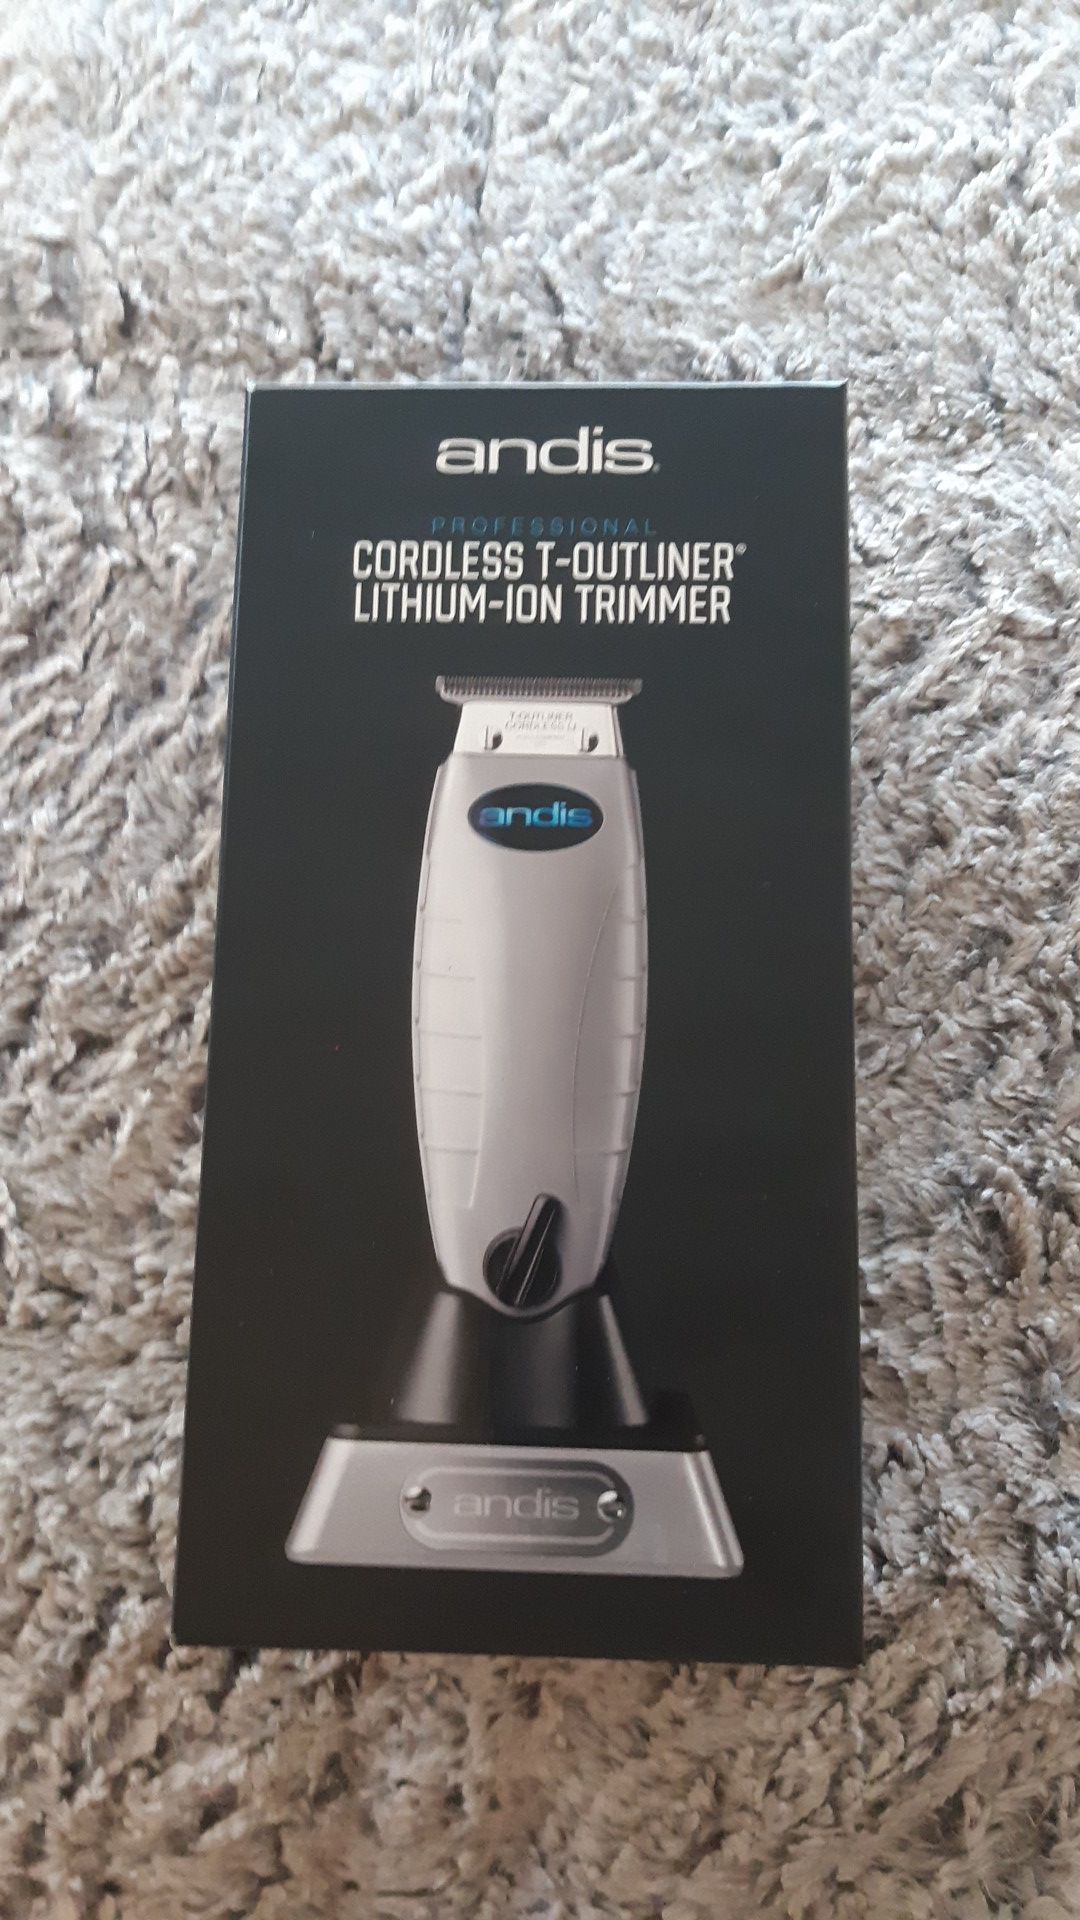 Andis Cordless T-outline lithium ion trimmer